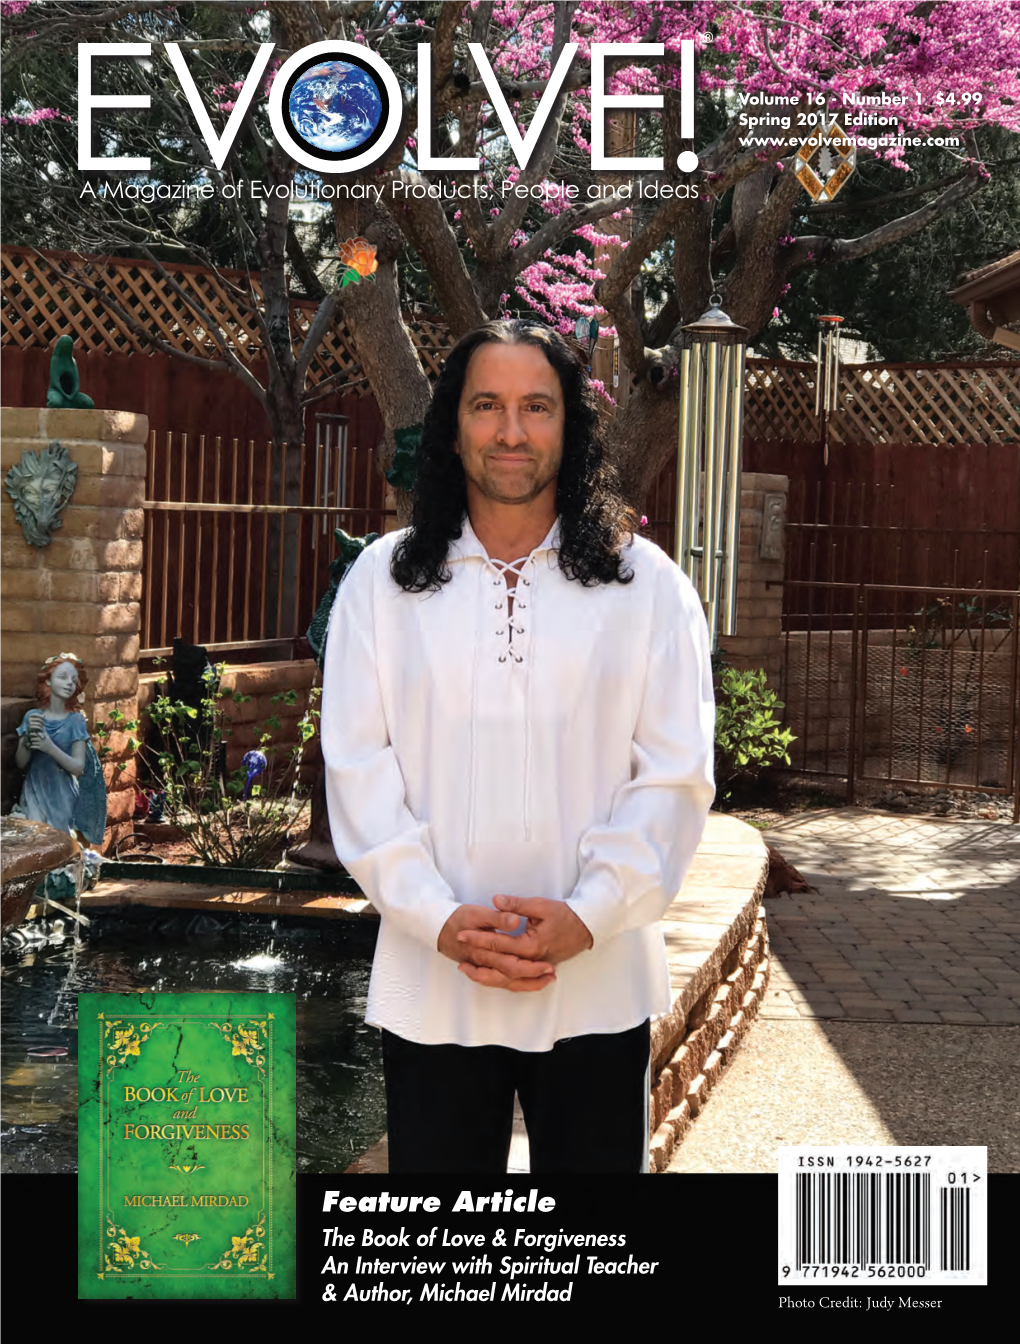 Feature Article the Book of Love & Forgiveness an Interview with Spiritual Teacher